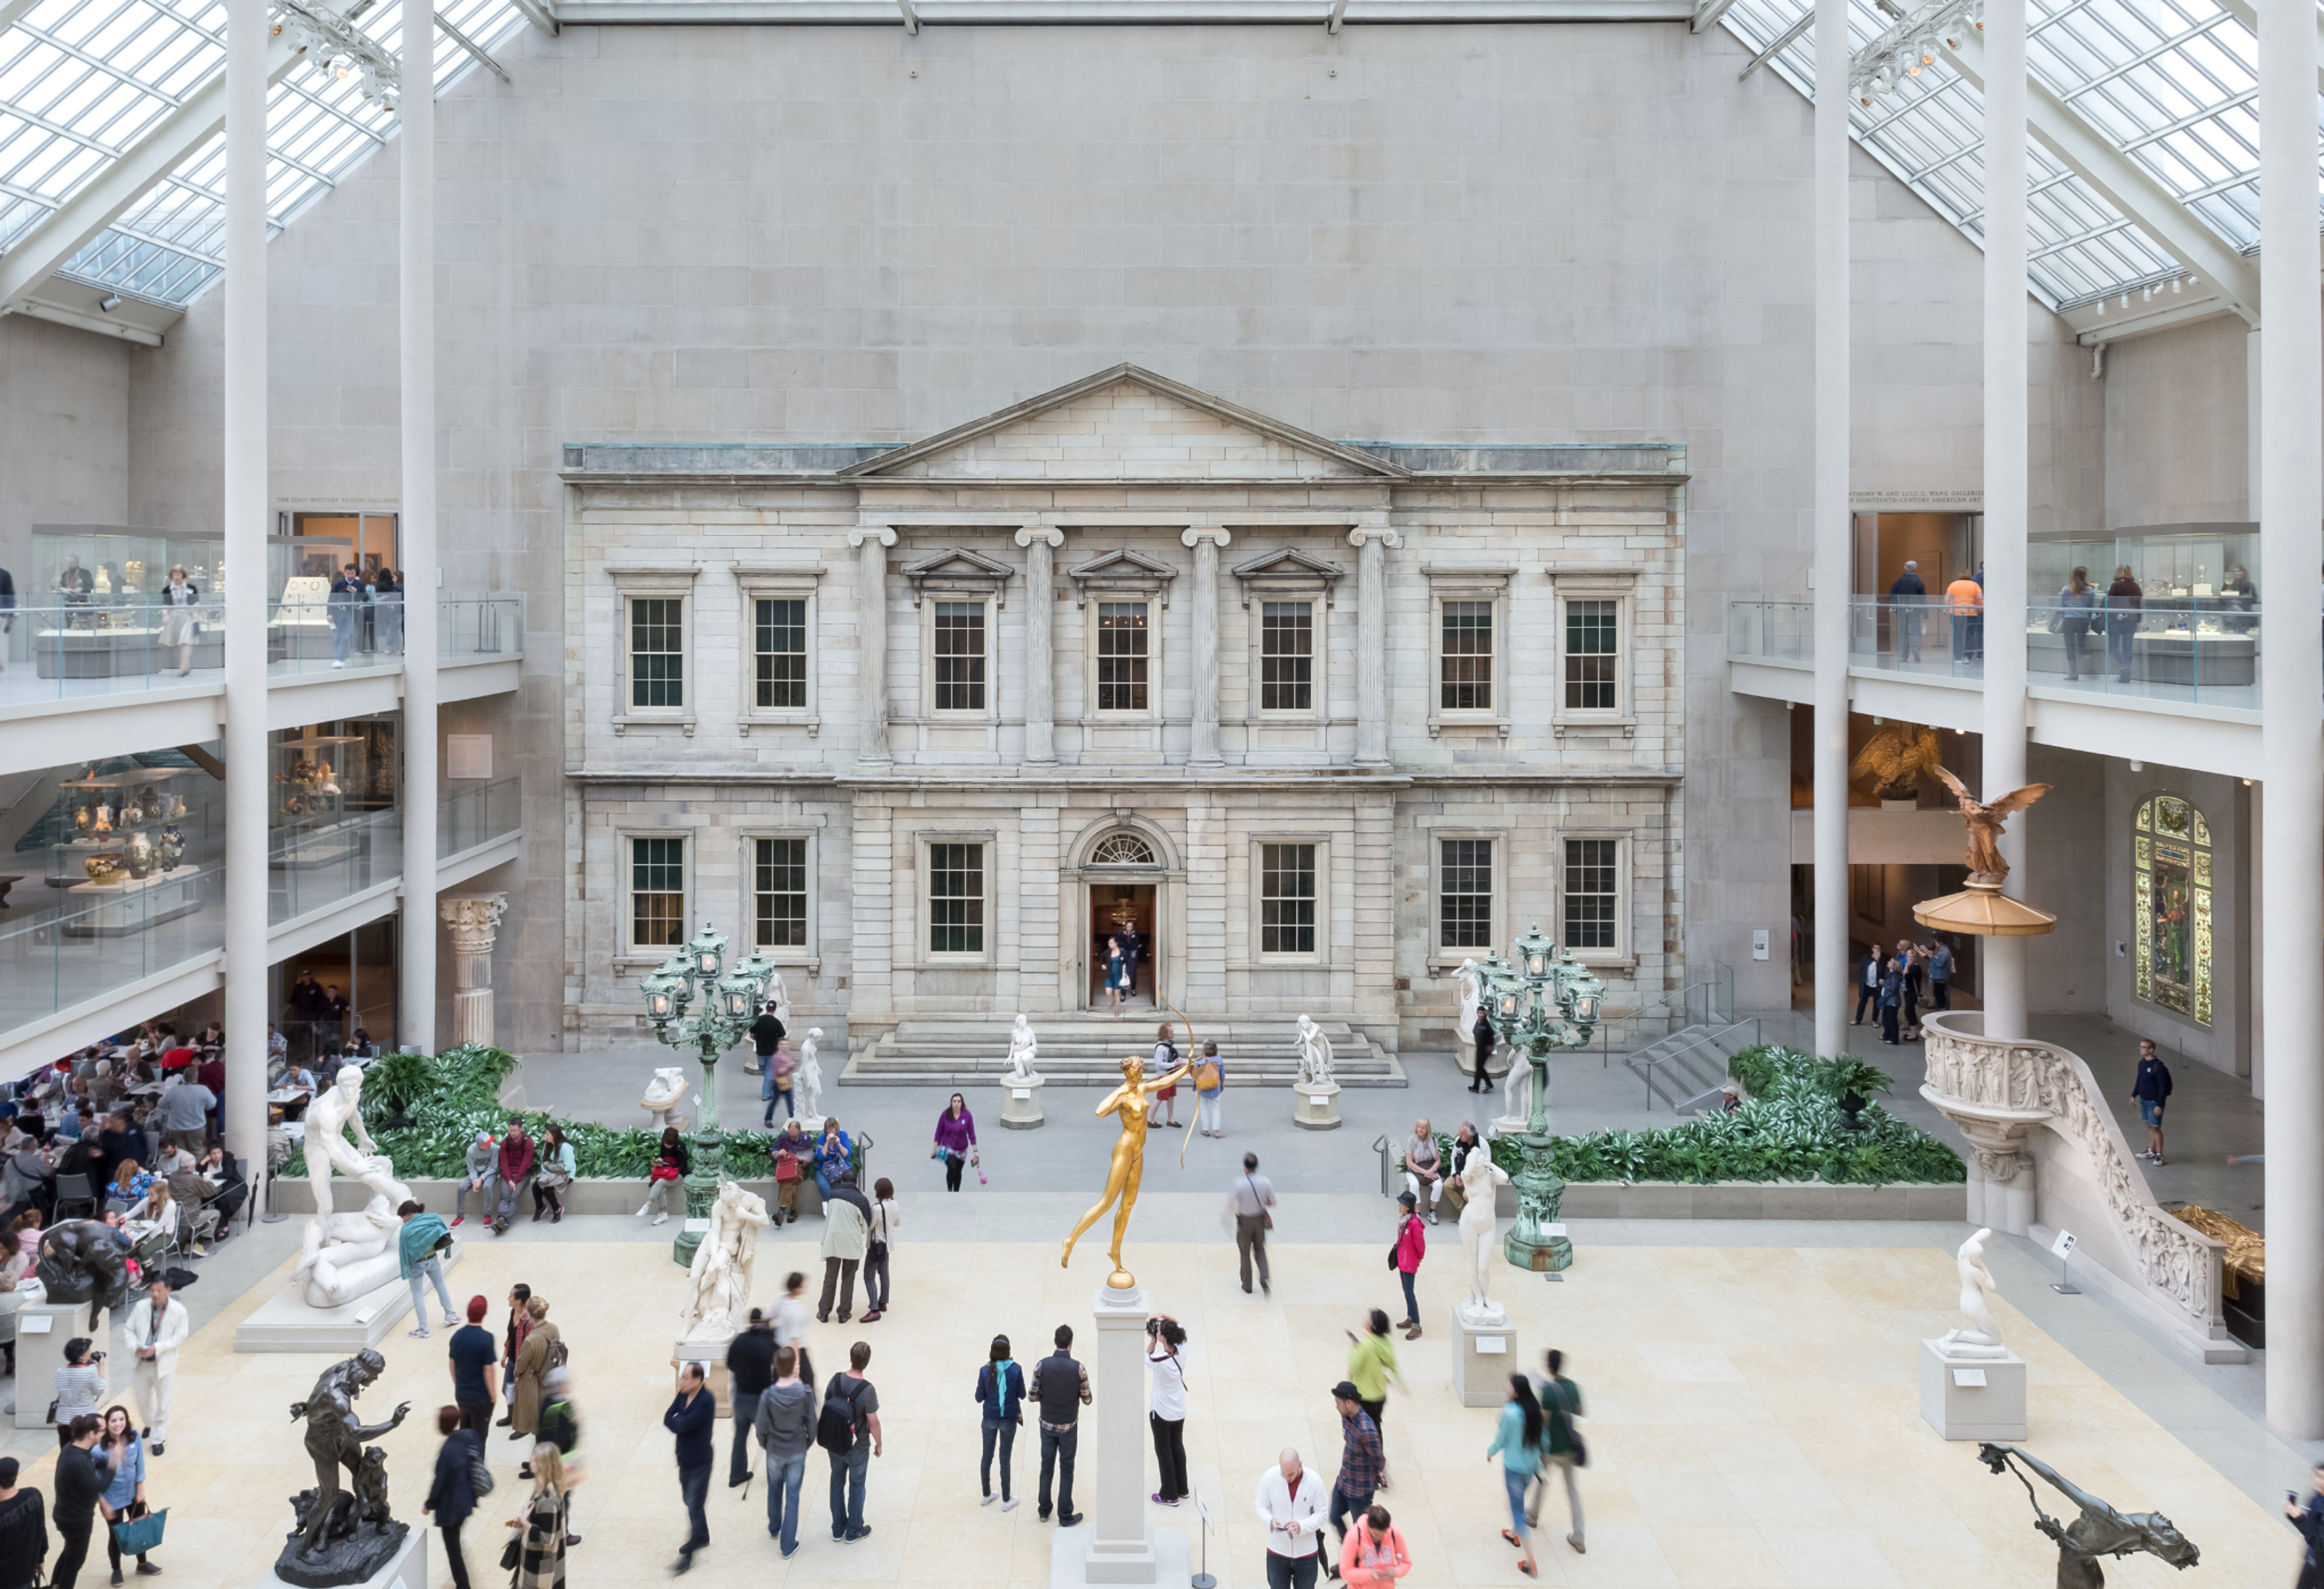 A sweeping shot of The Met's Charles Englehard Court-an airy room dotted with stone and metal sculptures and highlighted by a 19th-century bank facade.